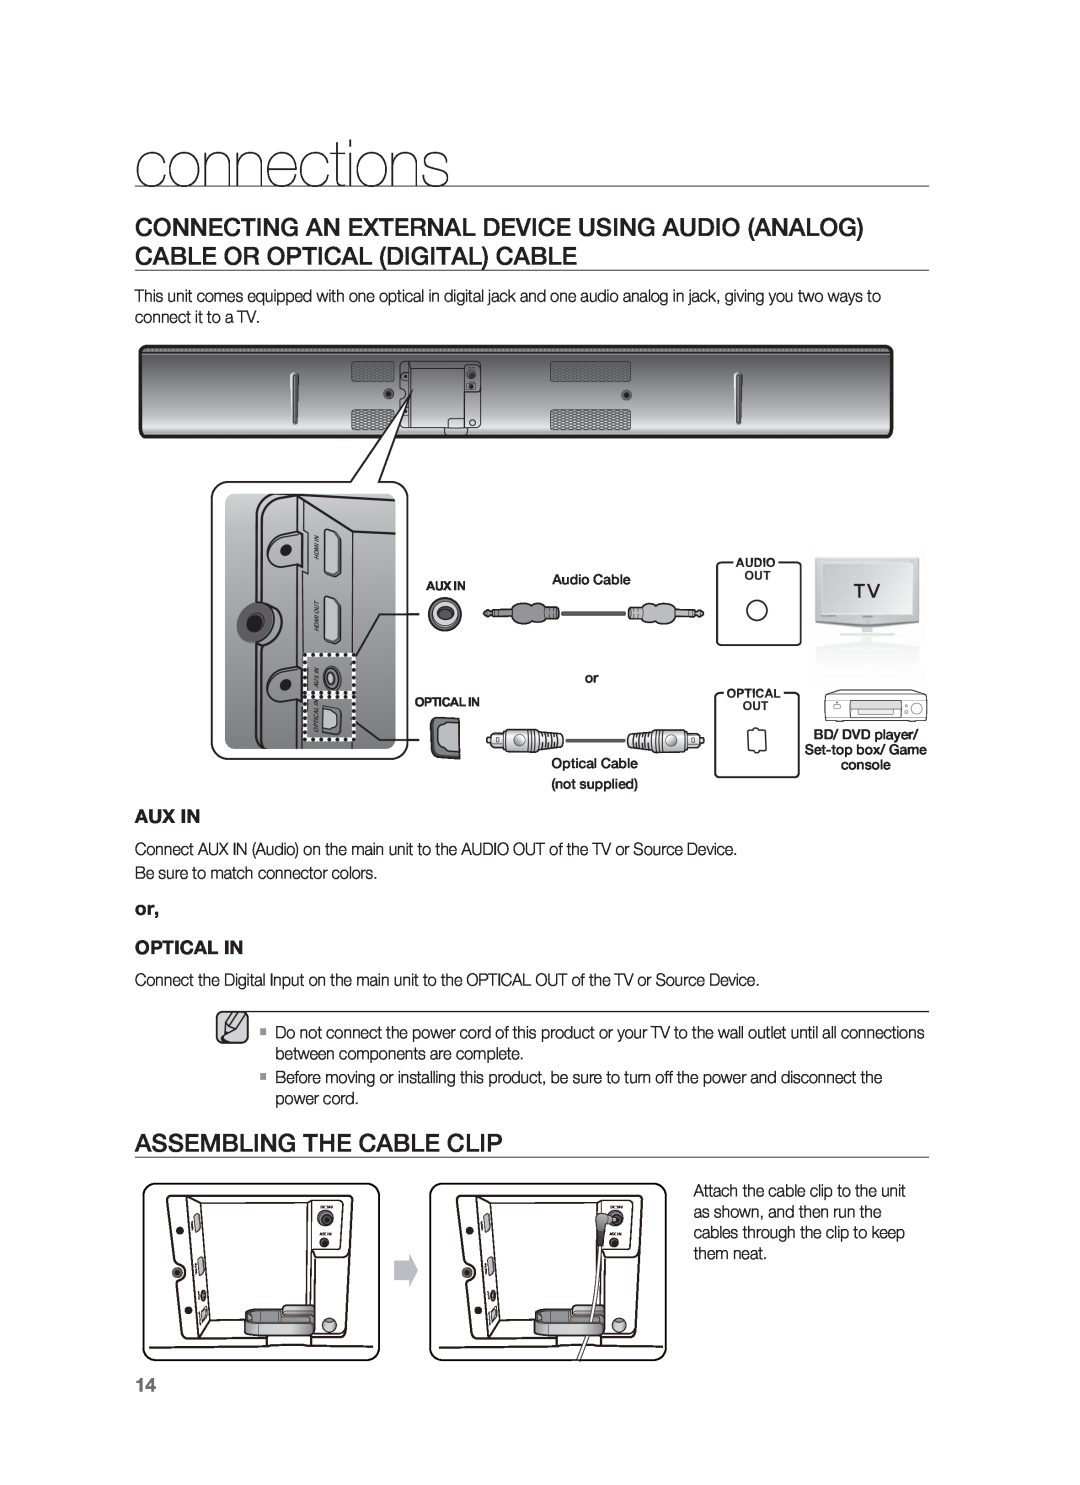 Samsung HW-F850/ZA user manual Assembling The Cable Clip, Aux In, or OPTICAL IN, connections 